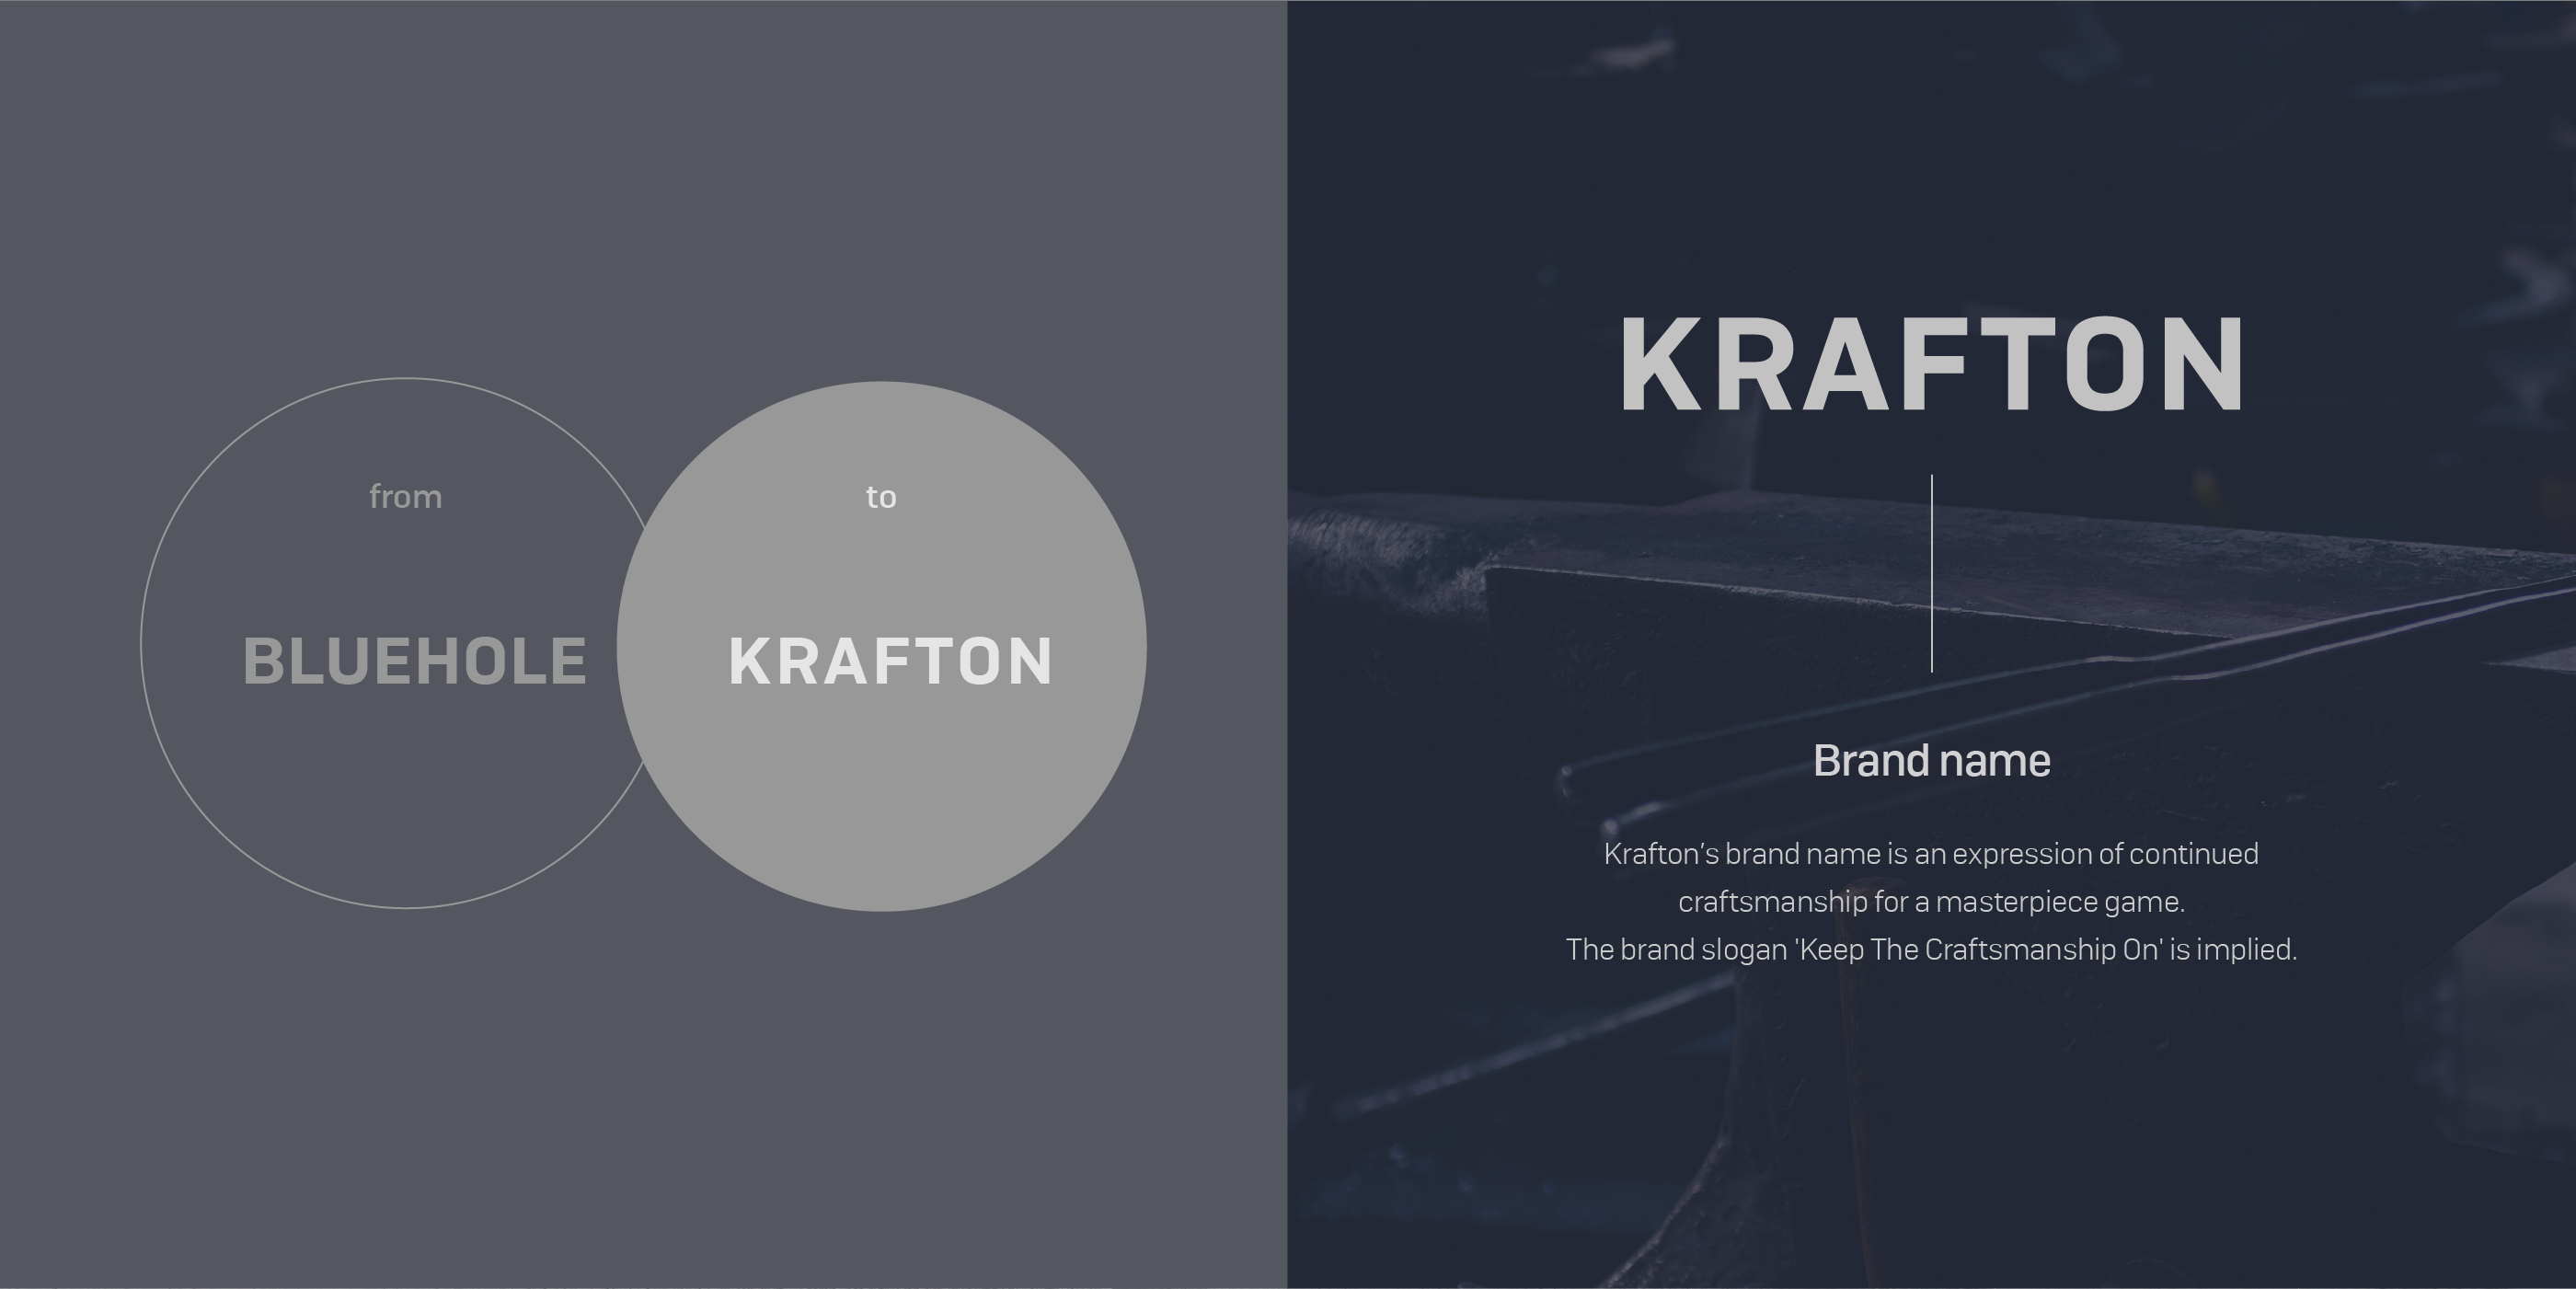 Krafton game union Brand eXperience Design renewal631ee688492253.5dd79cfb7c7d0.png